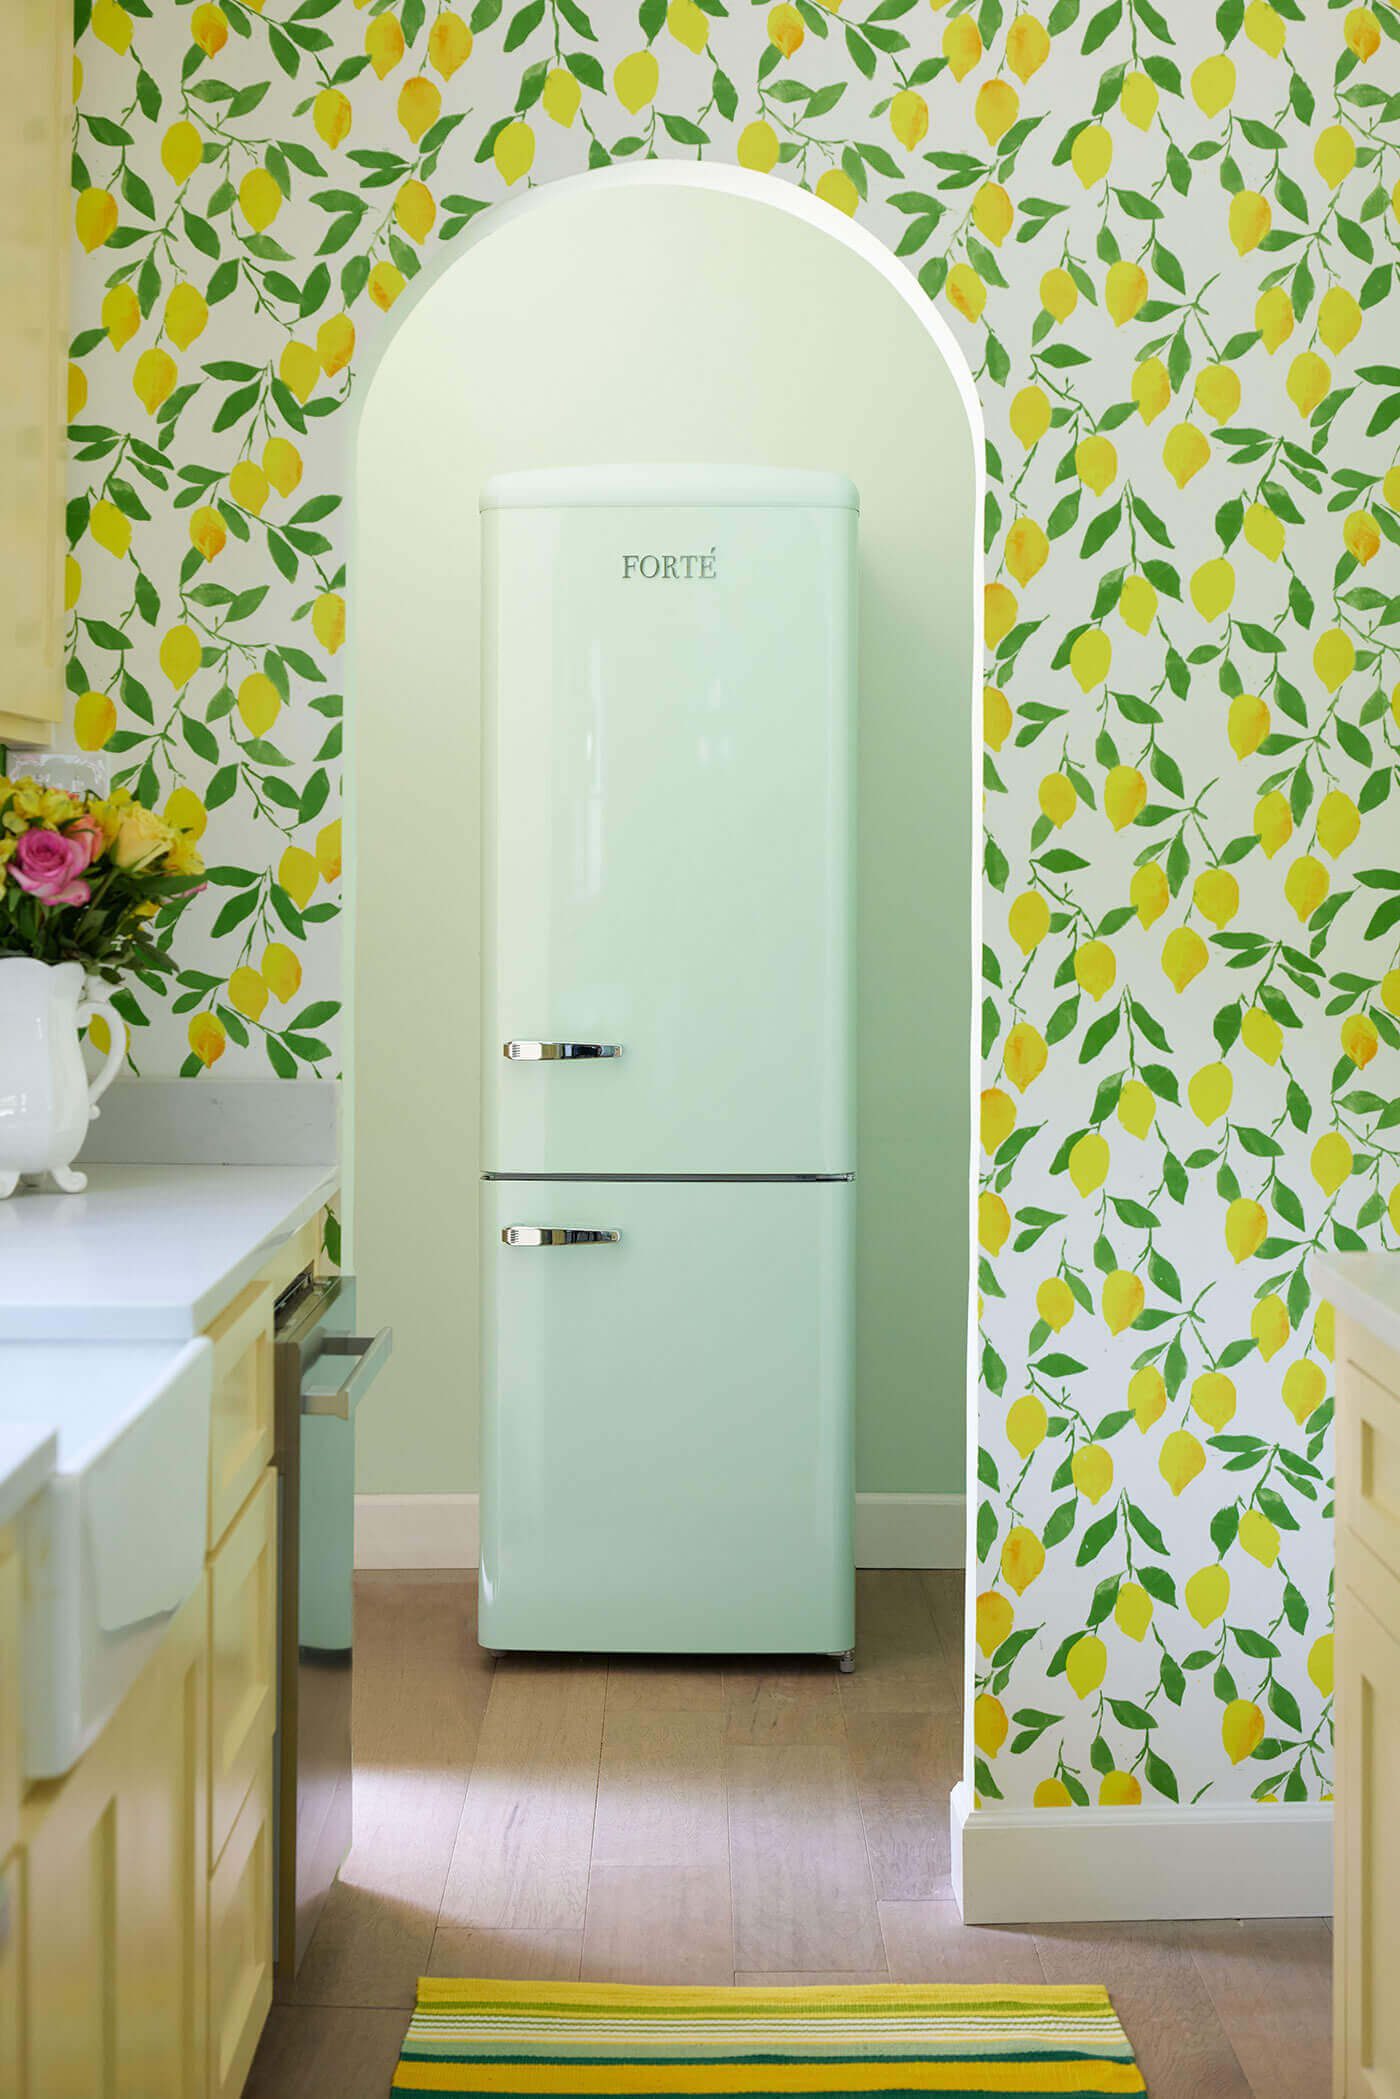 Wallpapered wall with archway entrance and retro fridge through archway